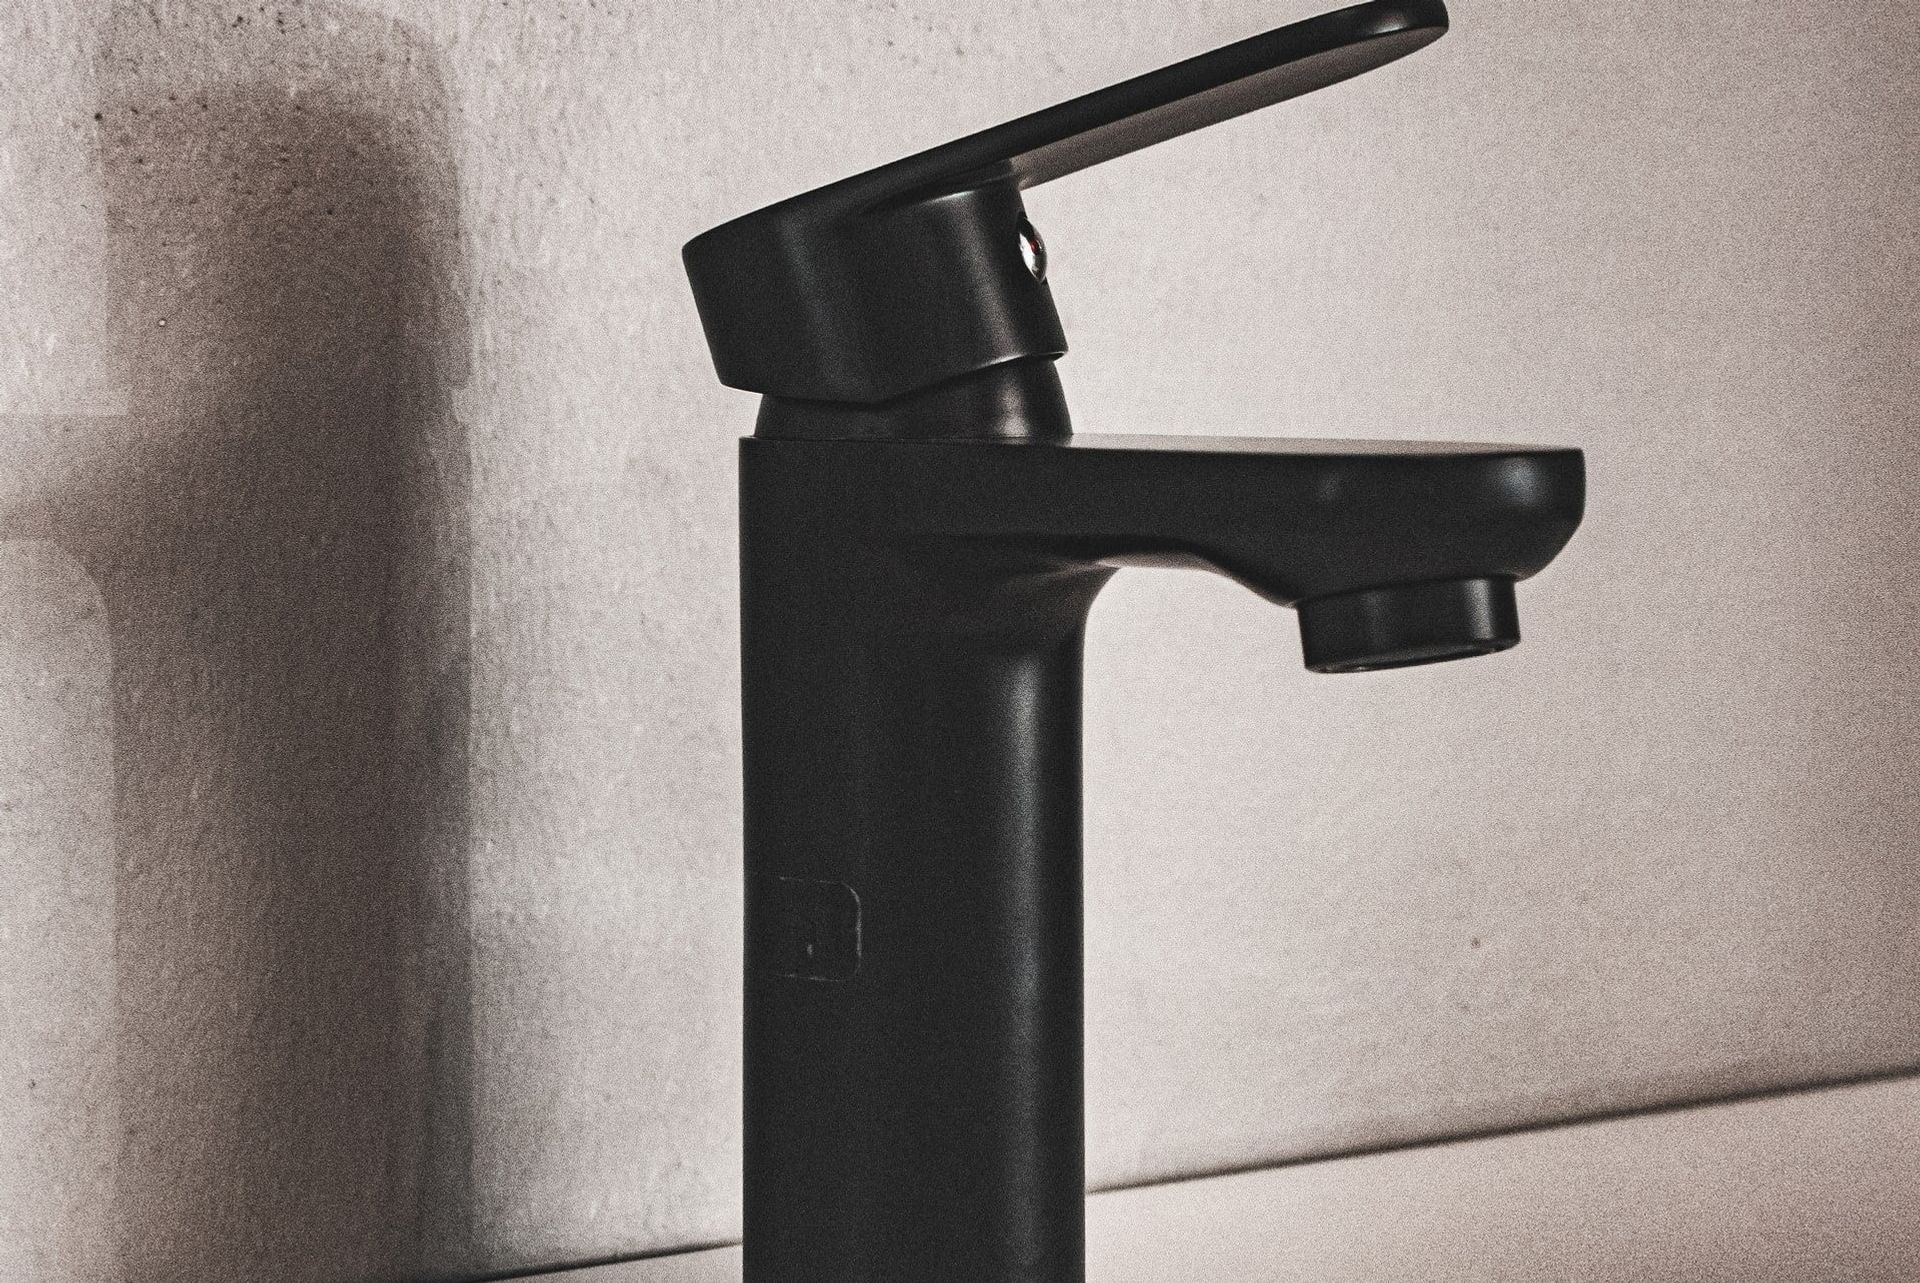 Why Matte Black Kitchen Mixer Taps Are Considered A Classic Style?